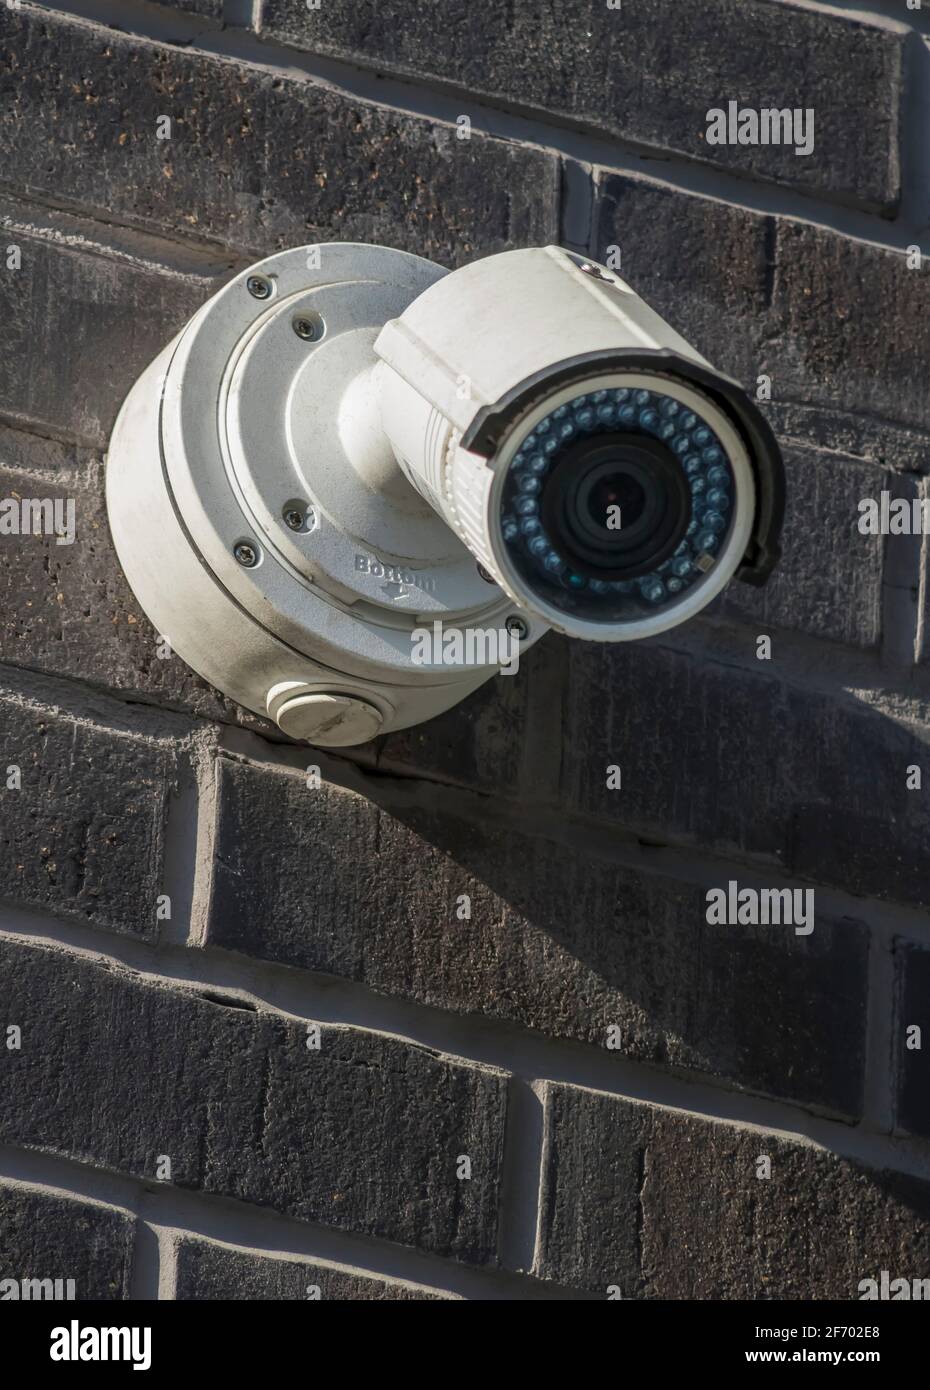 Security CCTV camera in office building Stock Photo